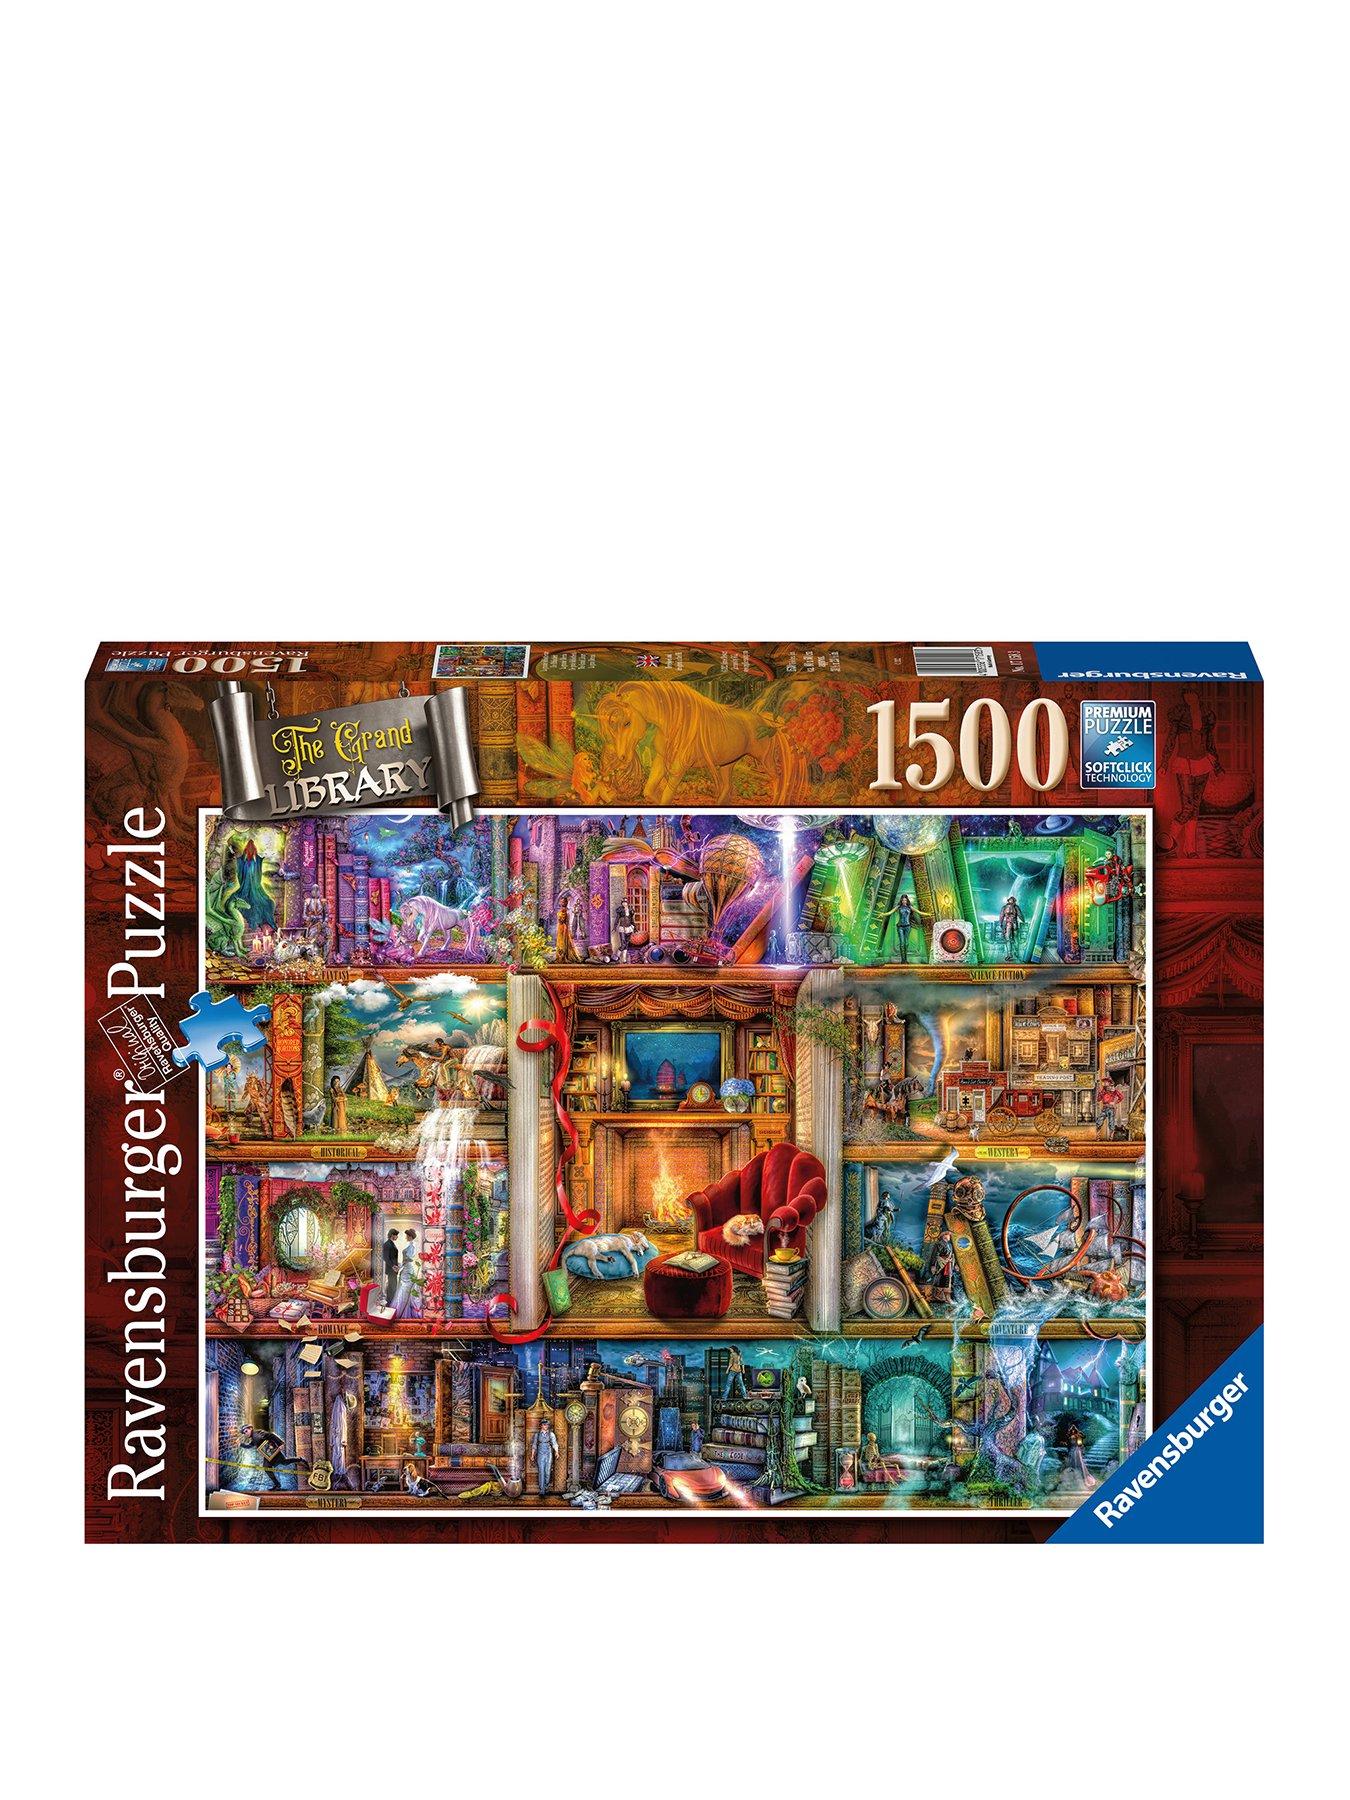 3000 Pieces Puzzles for Adults Jigsaw Puzzles Eiffel TowerJigsaw Wooden Puzzles,Puzzle for Adults,Gift for Any Occasions Unique Puzzles for Kids and Teenagers Large Format Thick Lasting Jigsaw Puz